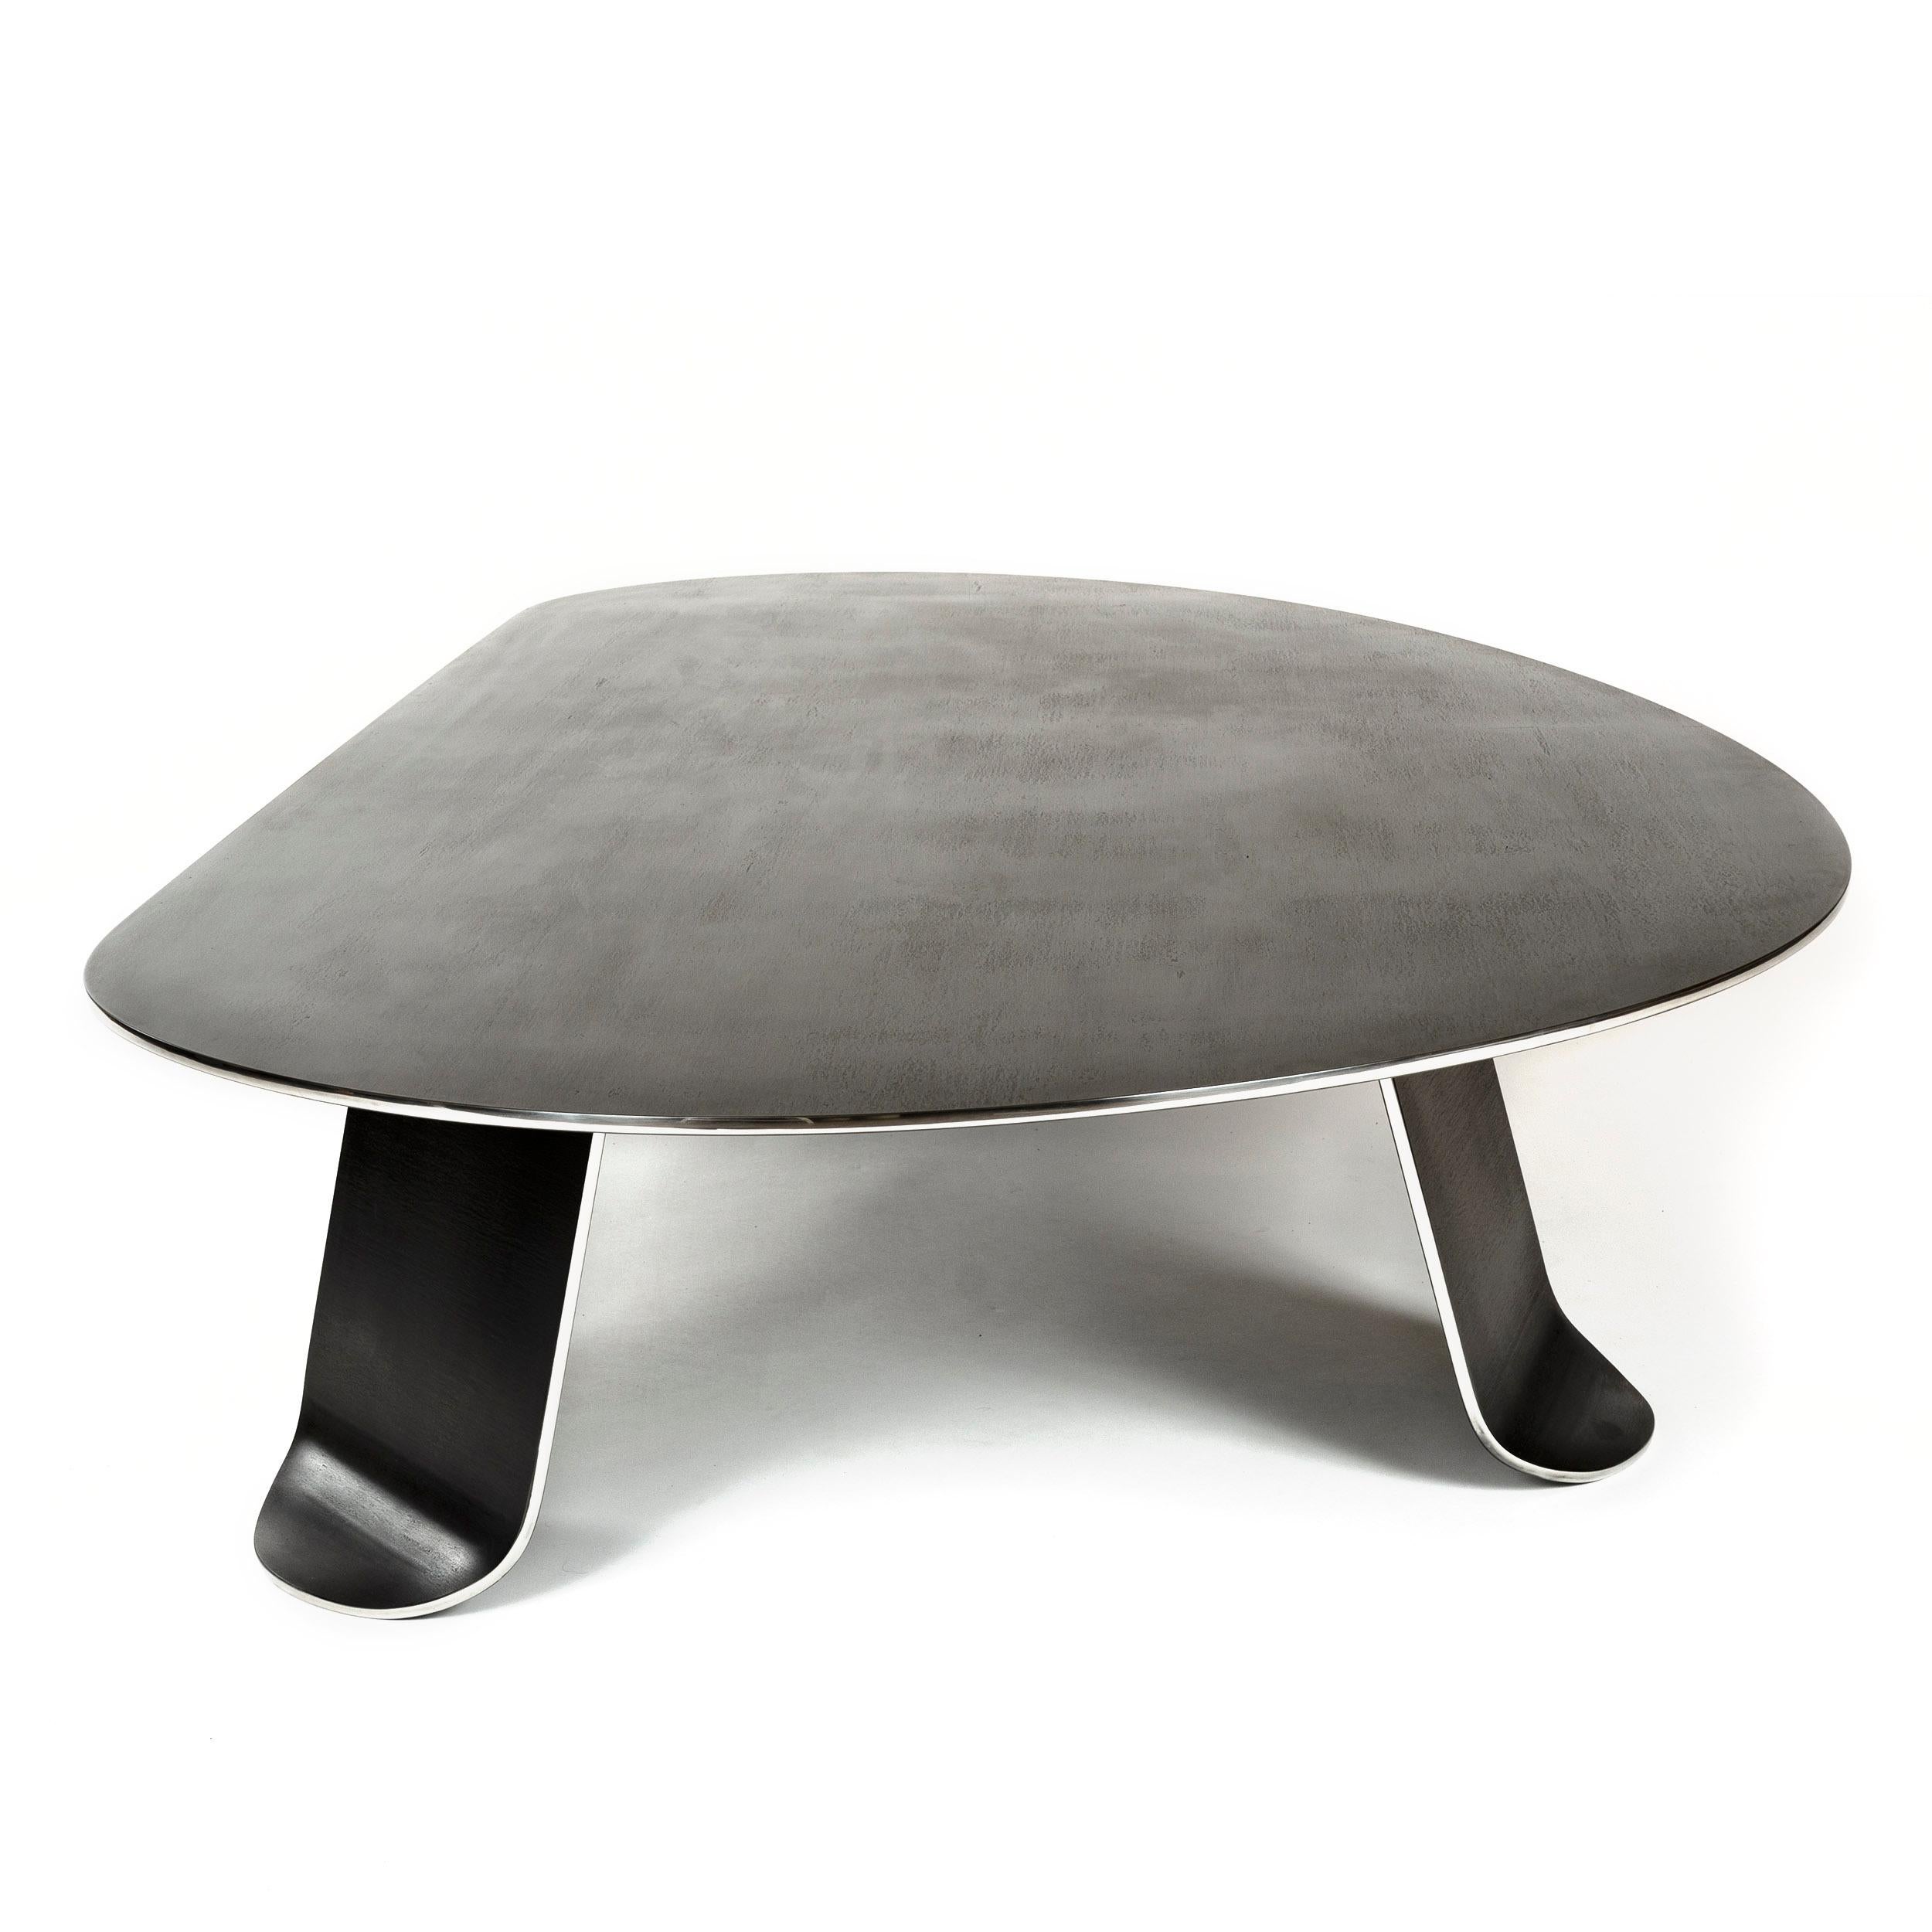 Wyeth Chrysalis Table No. 1 in Blackened Stainless Steel with Polished Edges For Sale 4